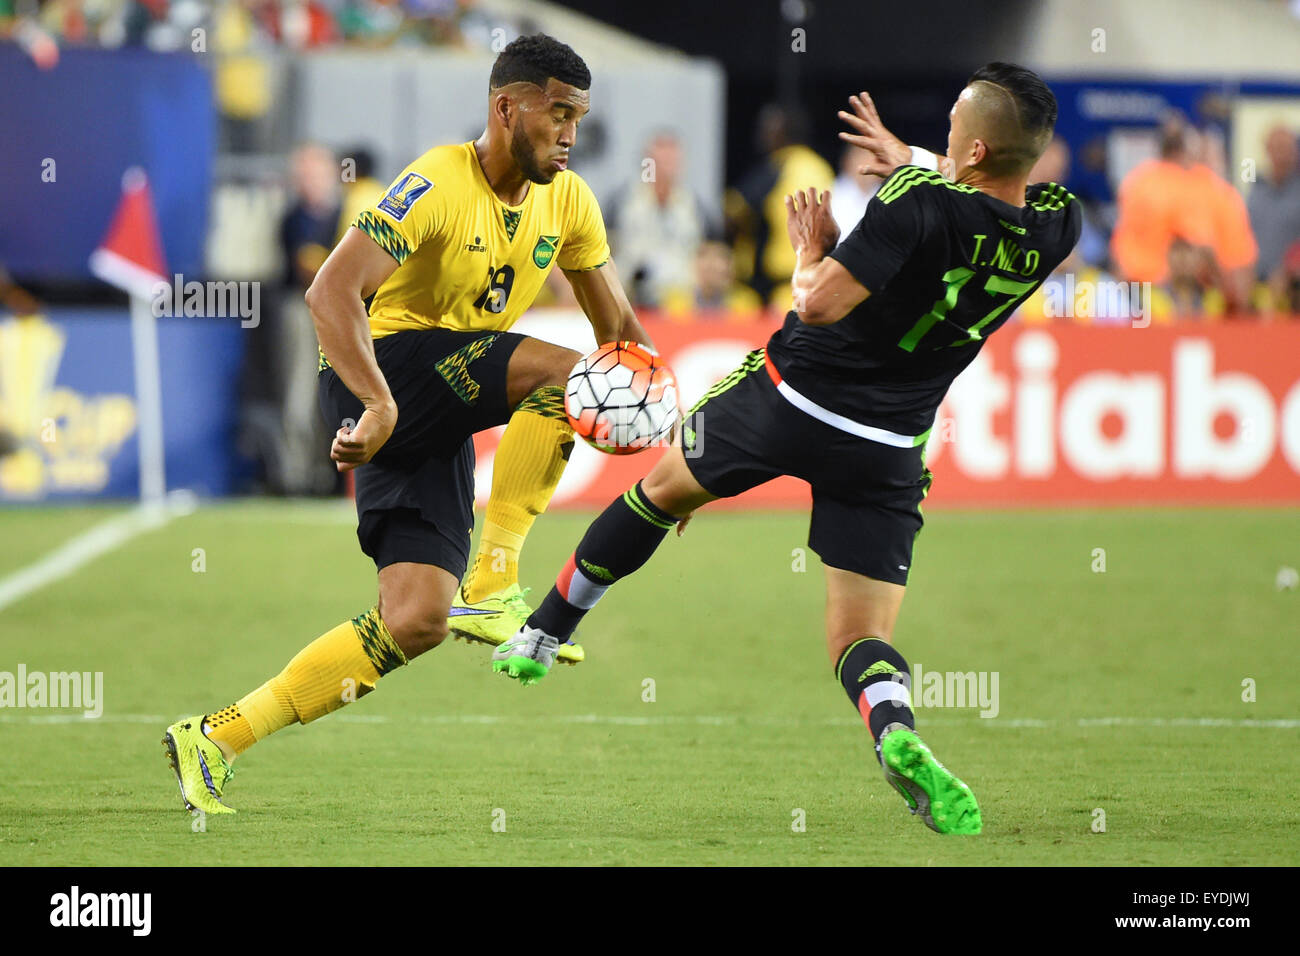 Philadelphia, Pennsylvania, USA. 26th July, 2015. Jamaica defender Adrian Mariappa #19 and Mexico midfielder Jorge Torres Nilo #17 battle for a loose ball during the 2015 CONCACAF Gold Cup final between Jamaica and Mexico at Lincoln Financial Field in Philadelphia, Pennsylvania. Mexico defeated Jamaica 3-1. Rich Barnes/CSM/Alamy Live News Stock Photo